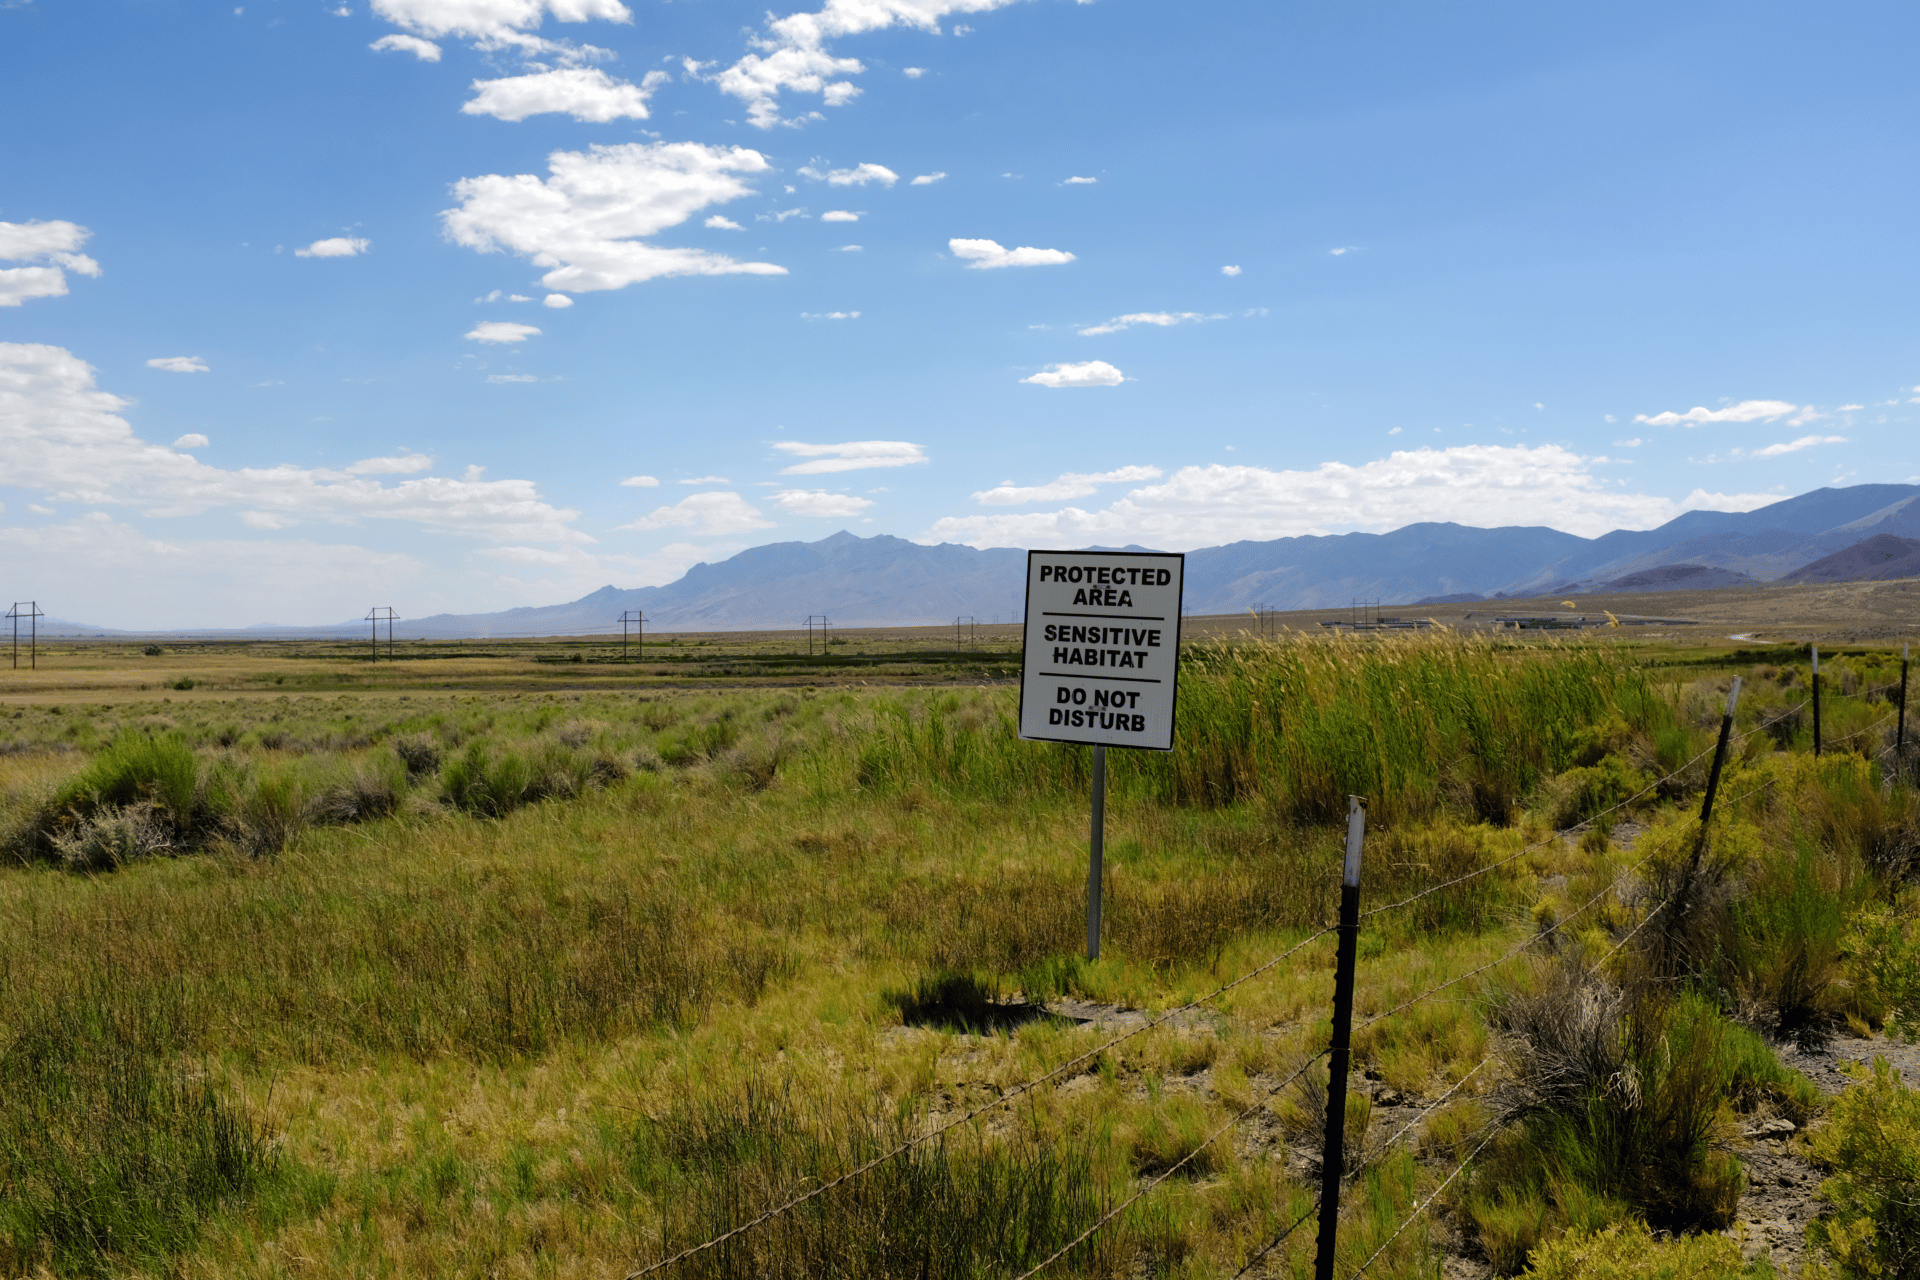 A sign in Dixie Meadows, with construction of the Dixie Meadows geothermal project visible in the right middle ground. Also visible is the highest point in the Stillwater Range, Job Peak, known as Fox Peak to the Fallon Paiute-Shoshone Tribe. Fox Peak is a sacred site, and the origin of humanity according to the tribe’s creation stories. (Jessica McKenzie)